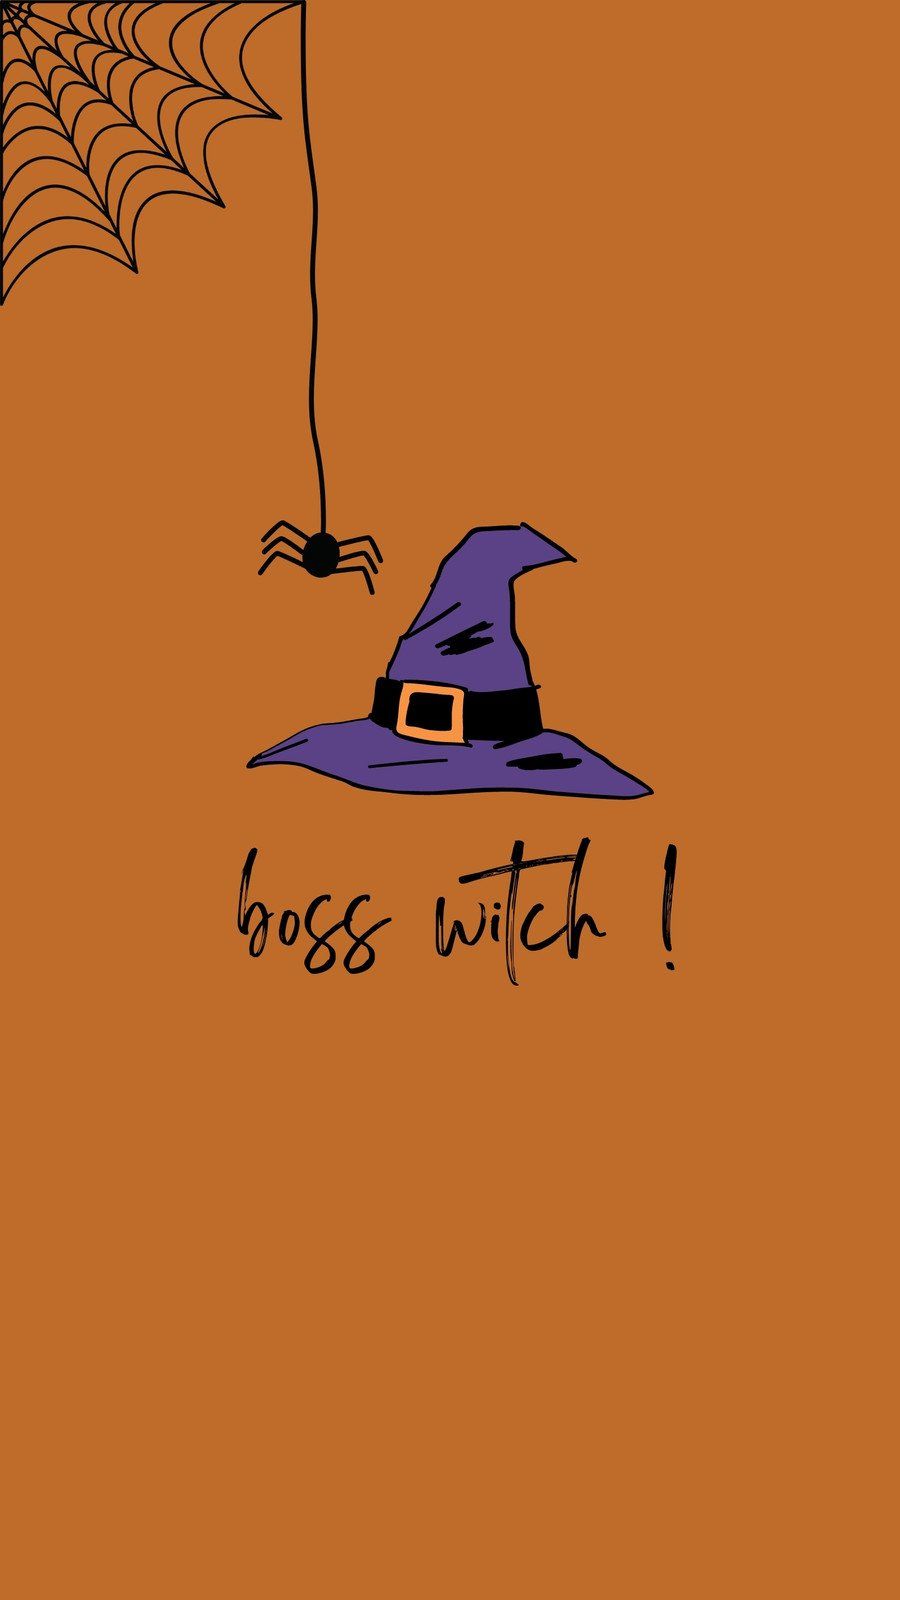 Halloween phone background with a witch hat and a spider - Witch, Halloween, cute purple